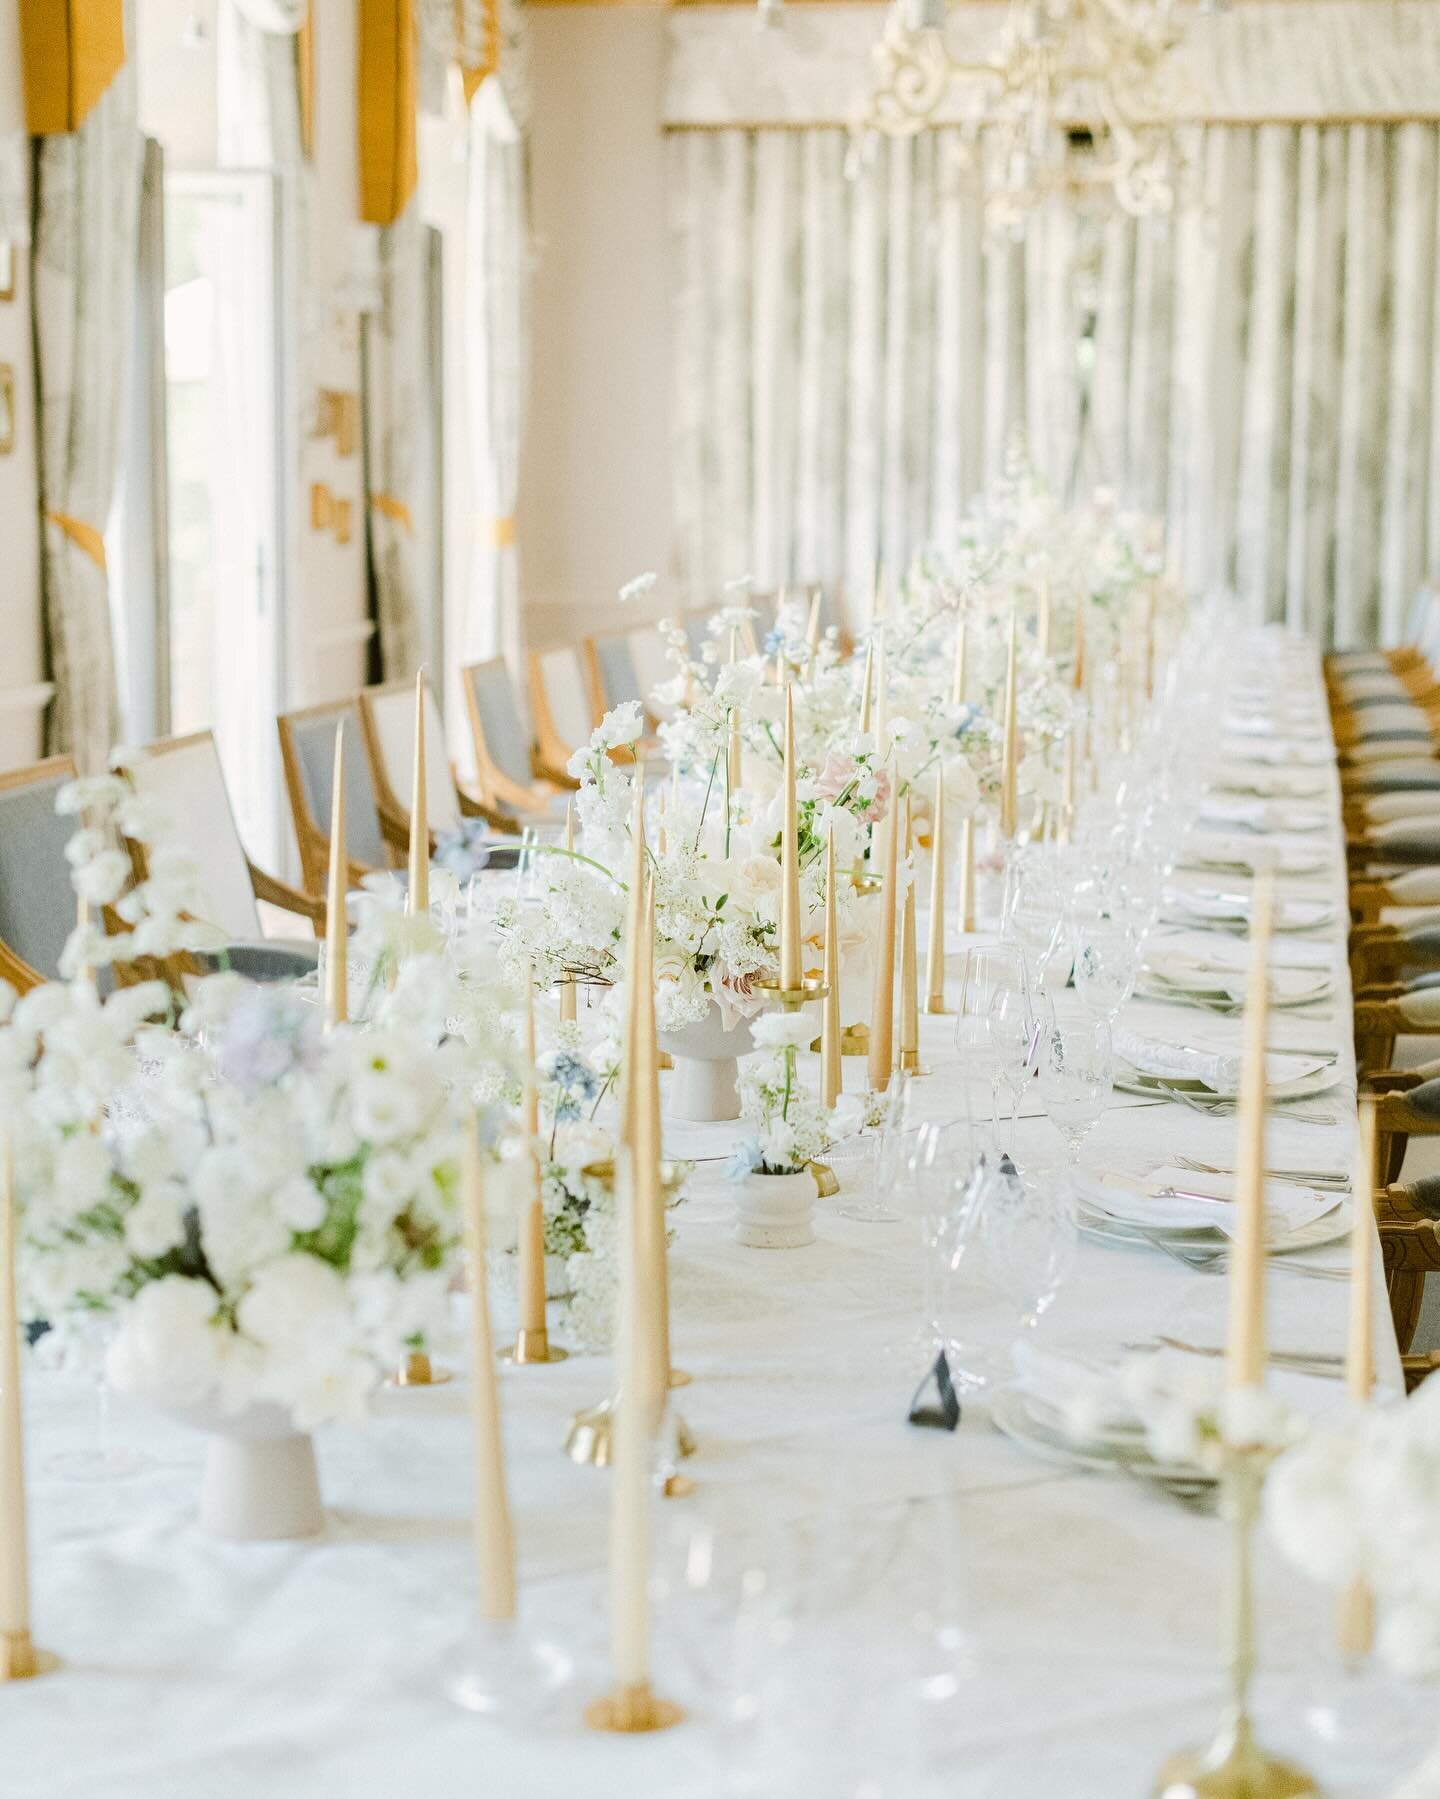 Embrace the magic of each setting! ✨ Whether it&rsquo;s an enchanting garden soir&eacute;e, a glamorous indoor gala, or a whimsical tented celebration &ndash; Where would you say &lsquo;I do&rsquo;?